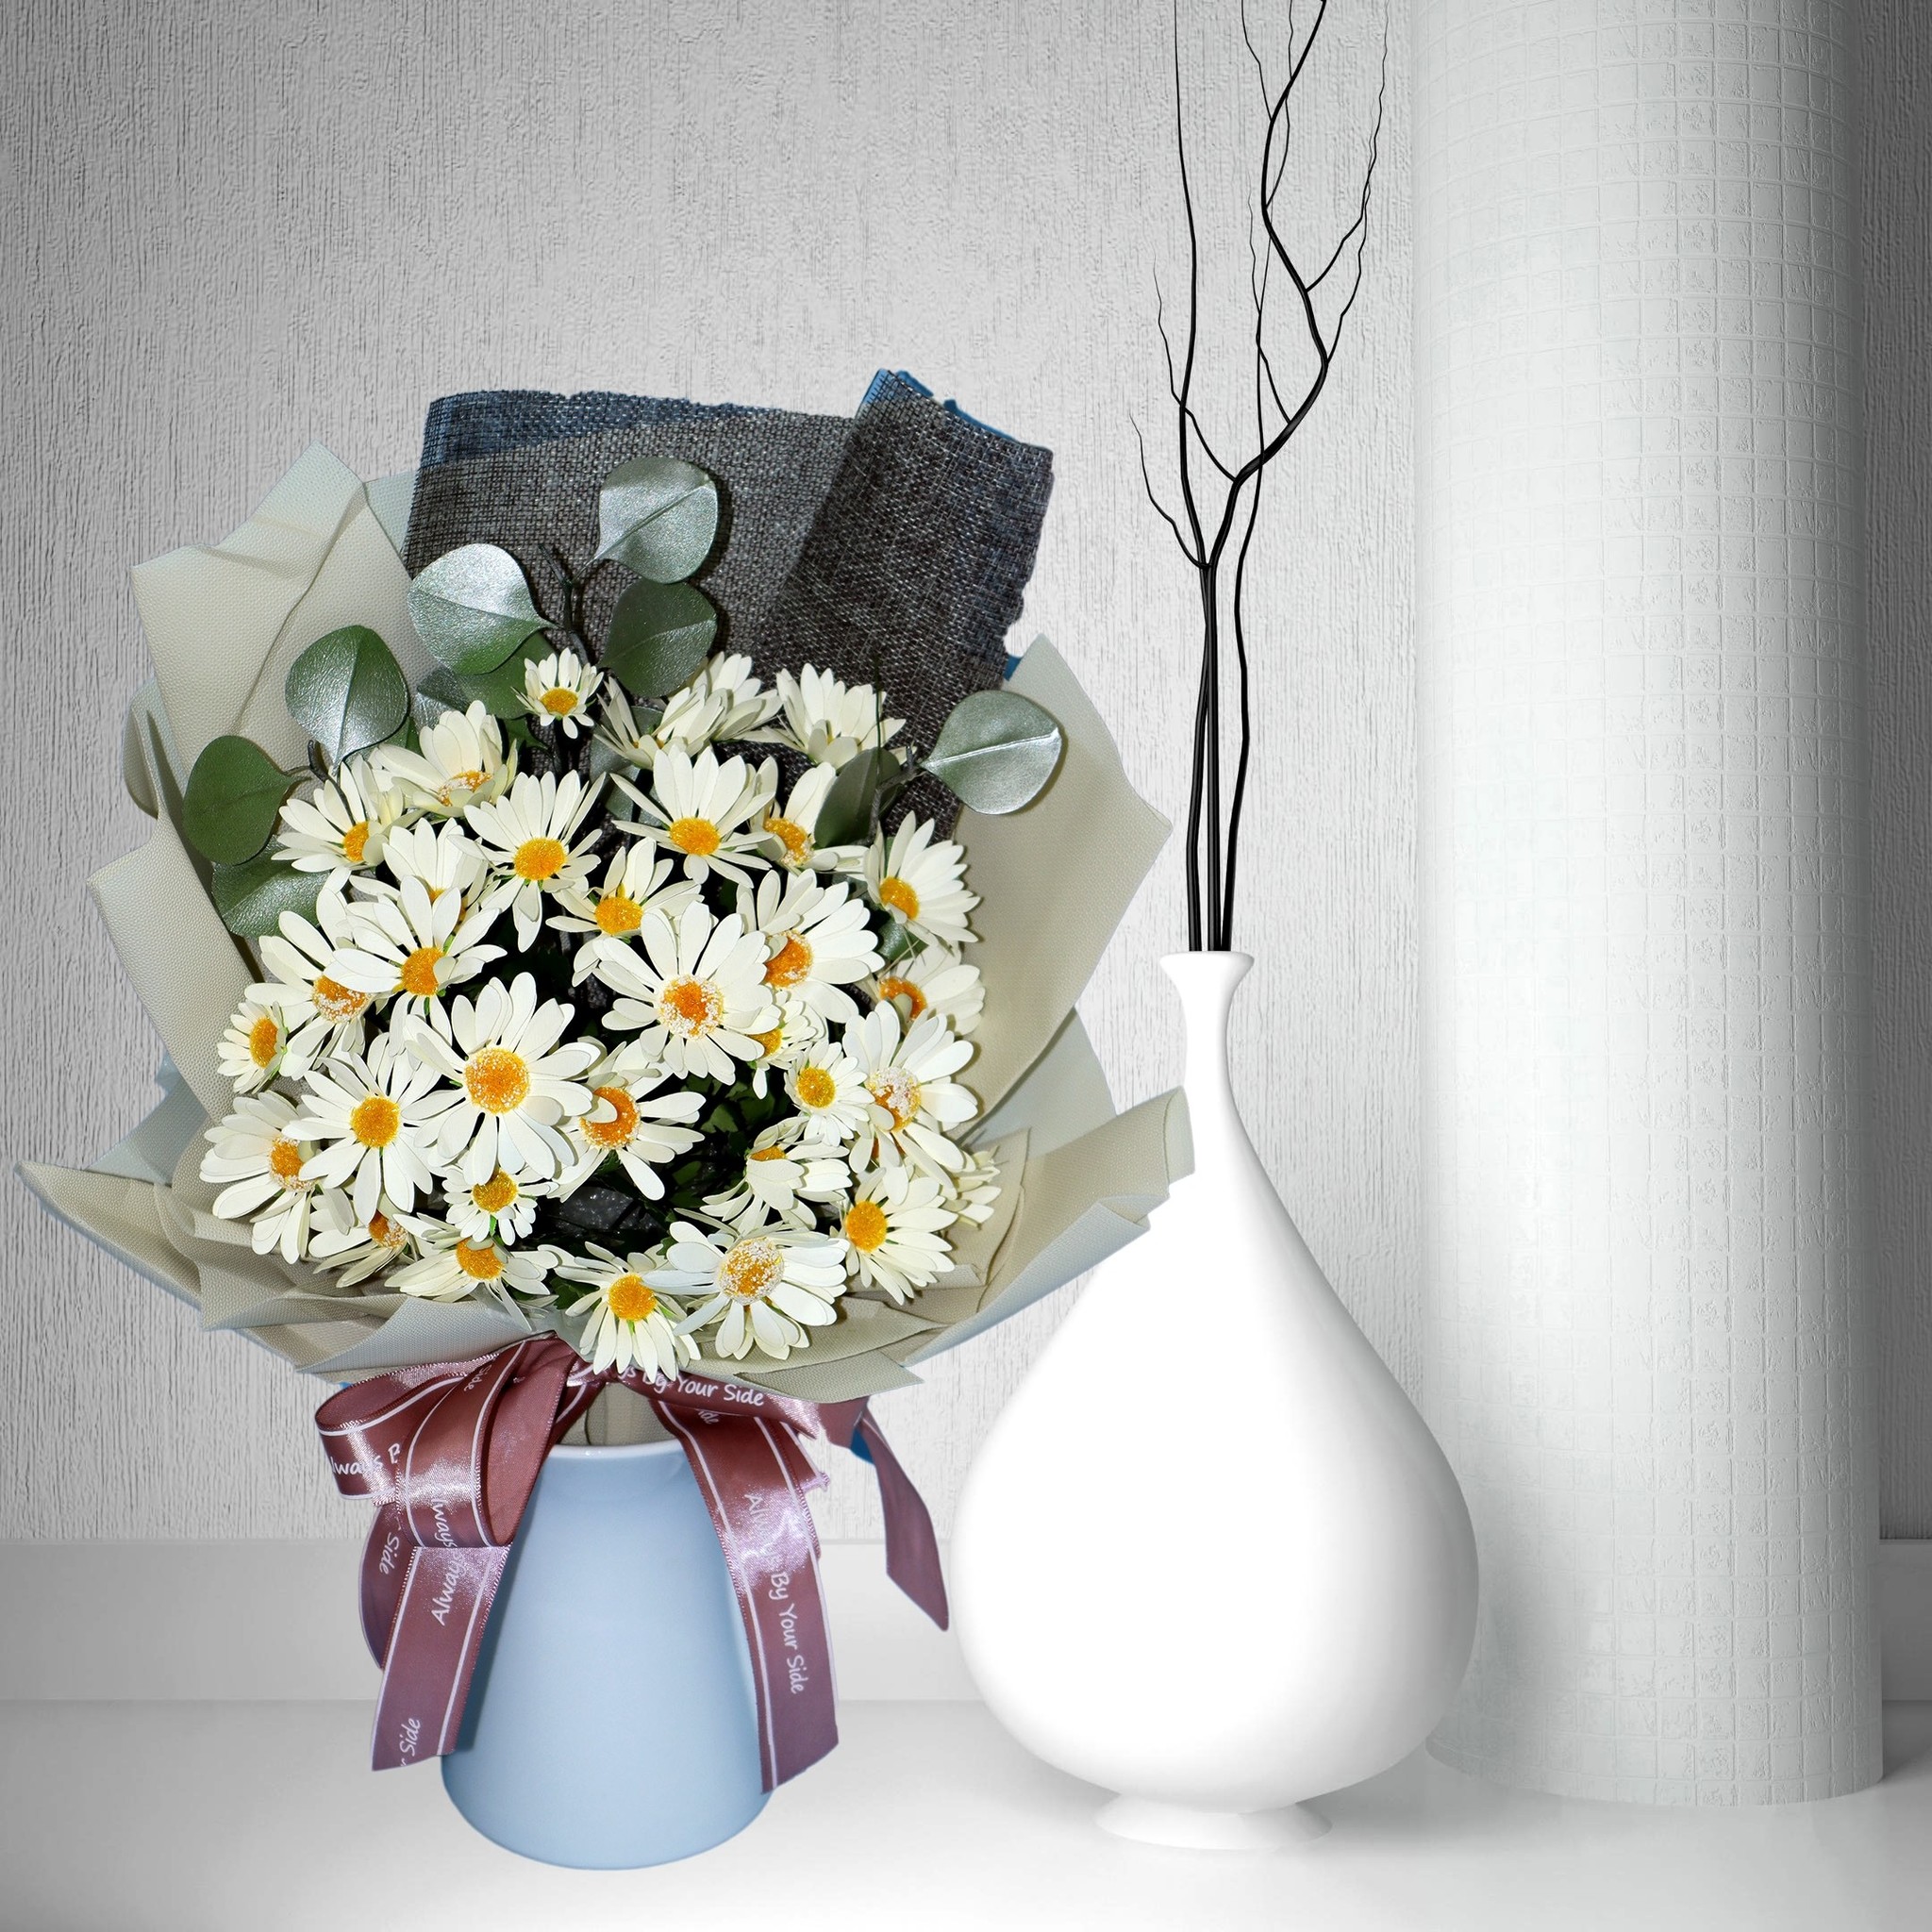 LINPOPUP FlowerBag Delux, handmade bouquet - incl. LIN POP UP card, as a gift for birthday - mother's day - anniversary - get well - thank you - congratulations - daisies, LIN17759, LINPopUp®, N900